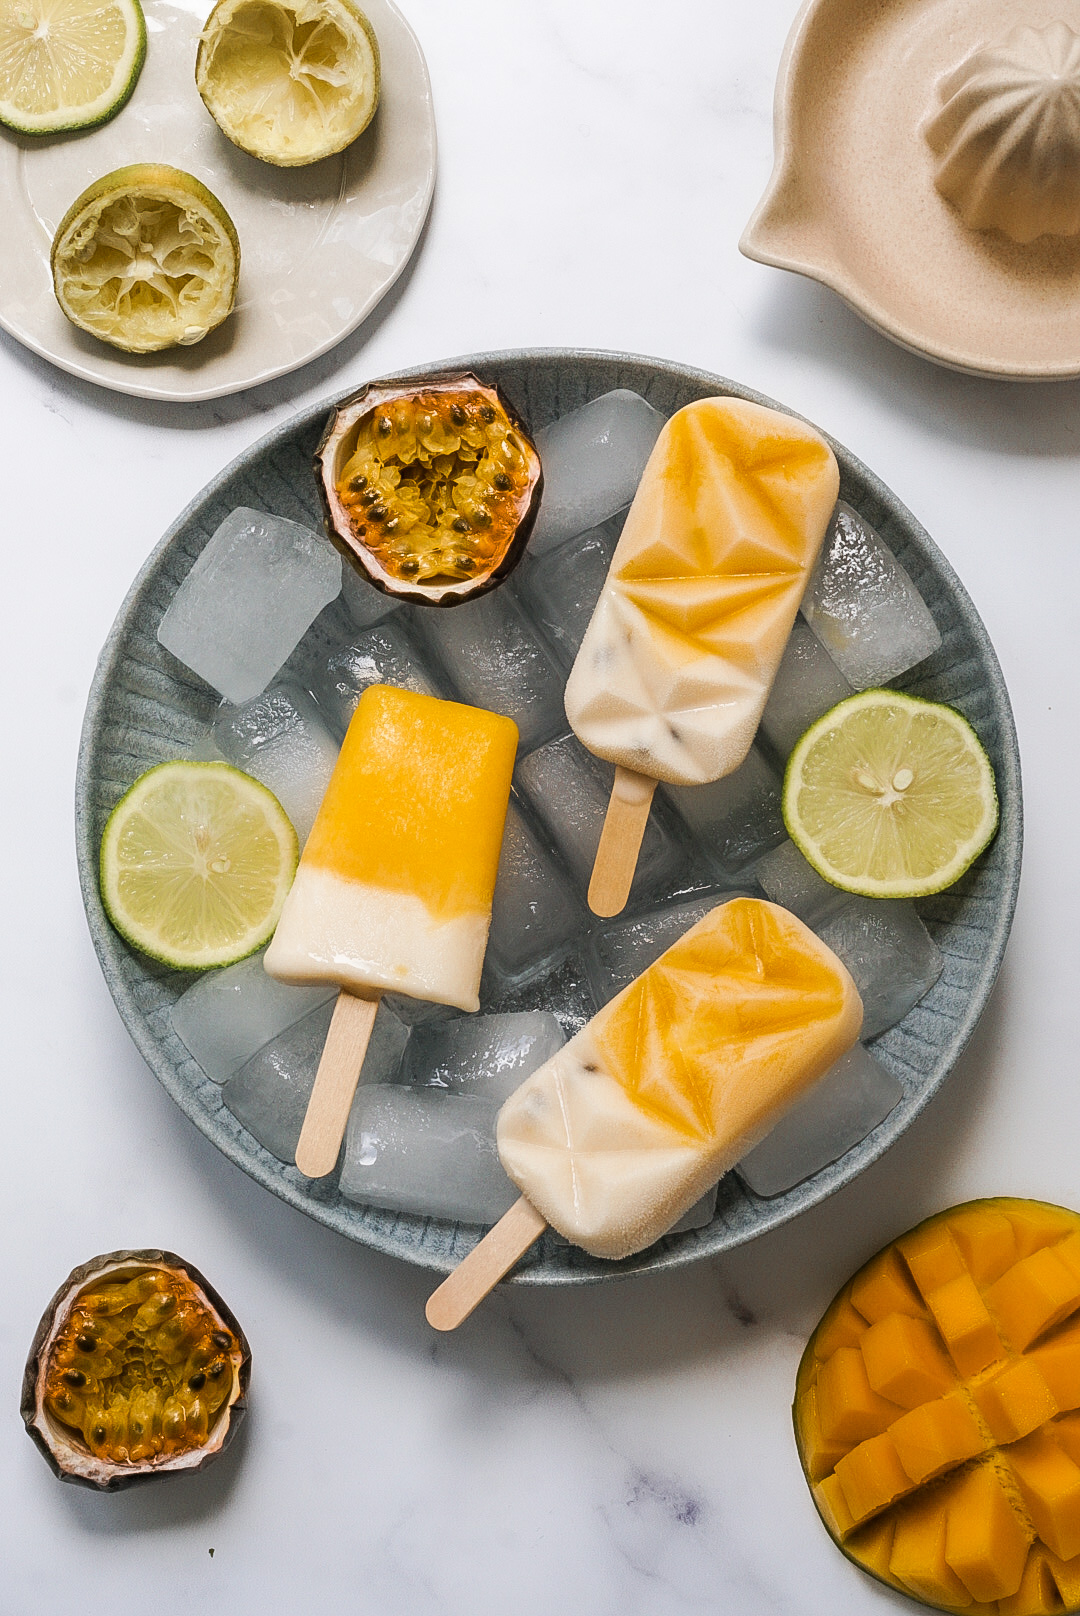 HEALTHY POPSICLE recipes: MANGO PASSION FRUITS